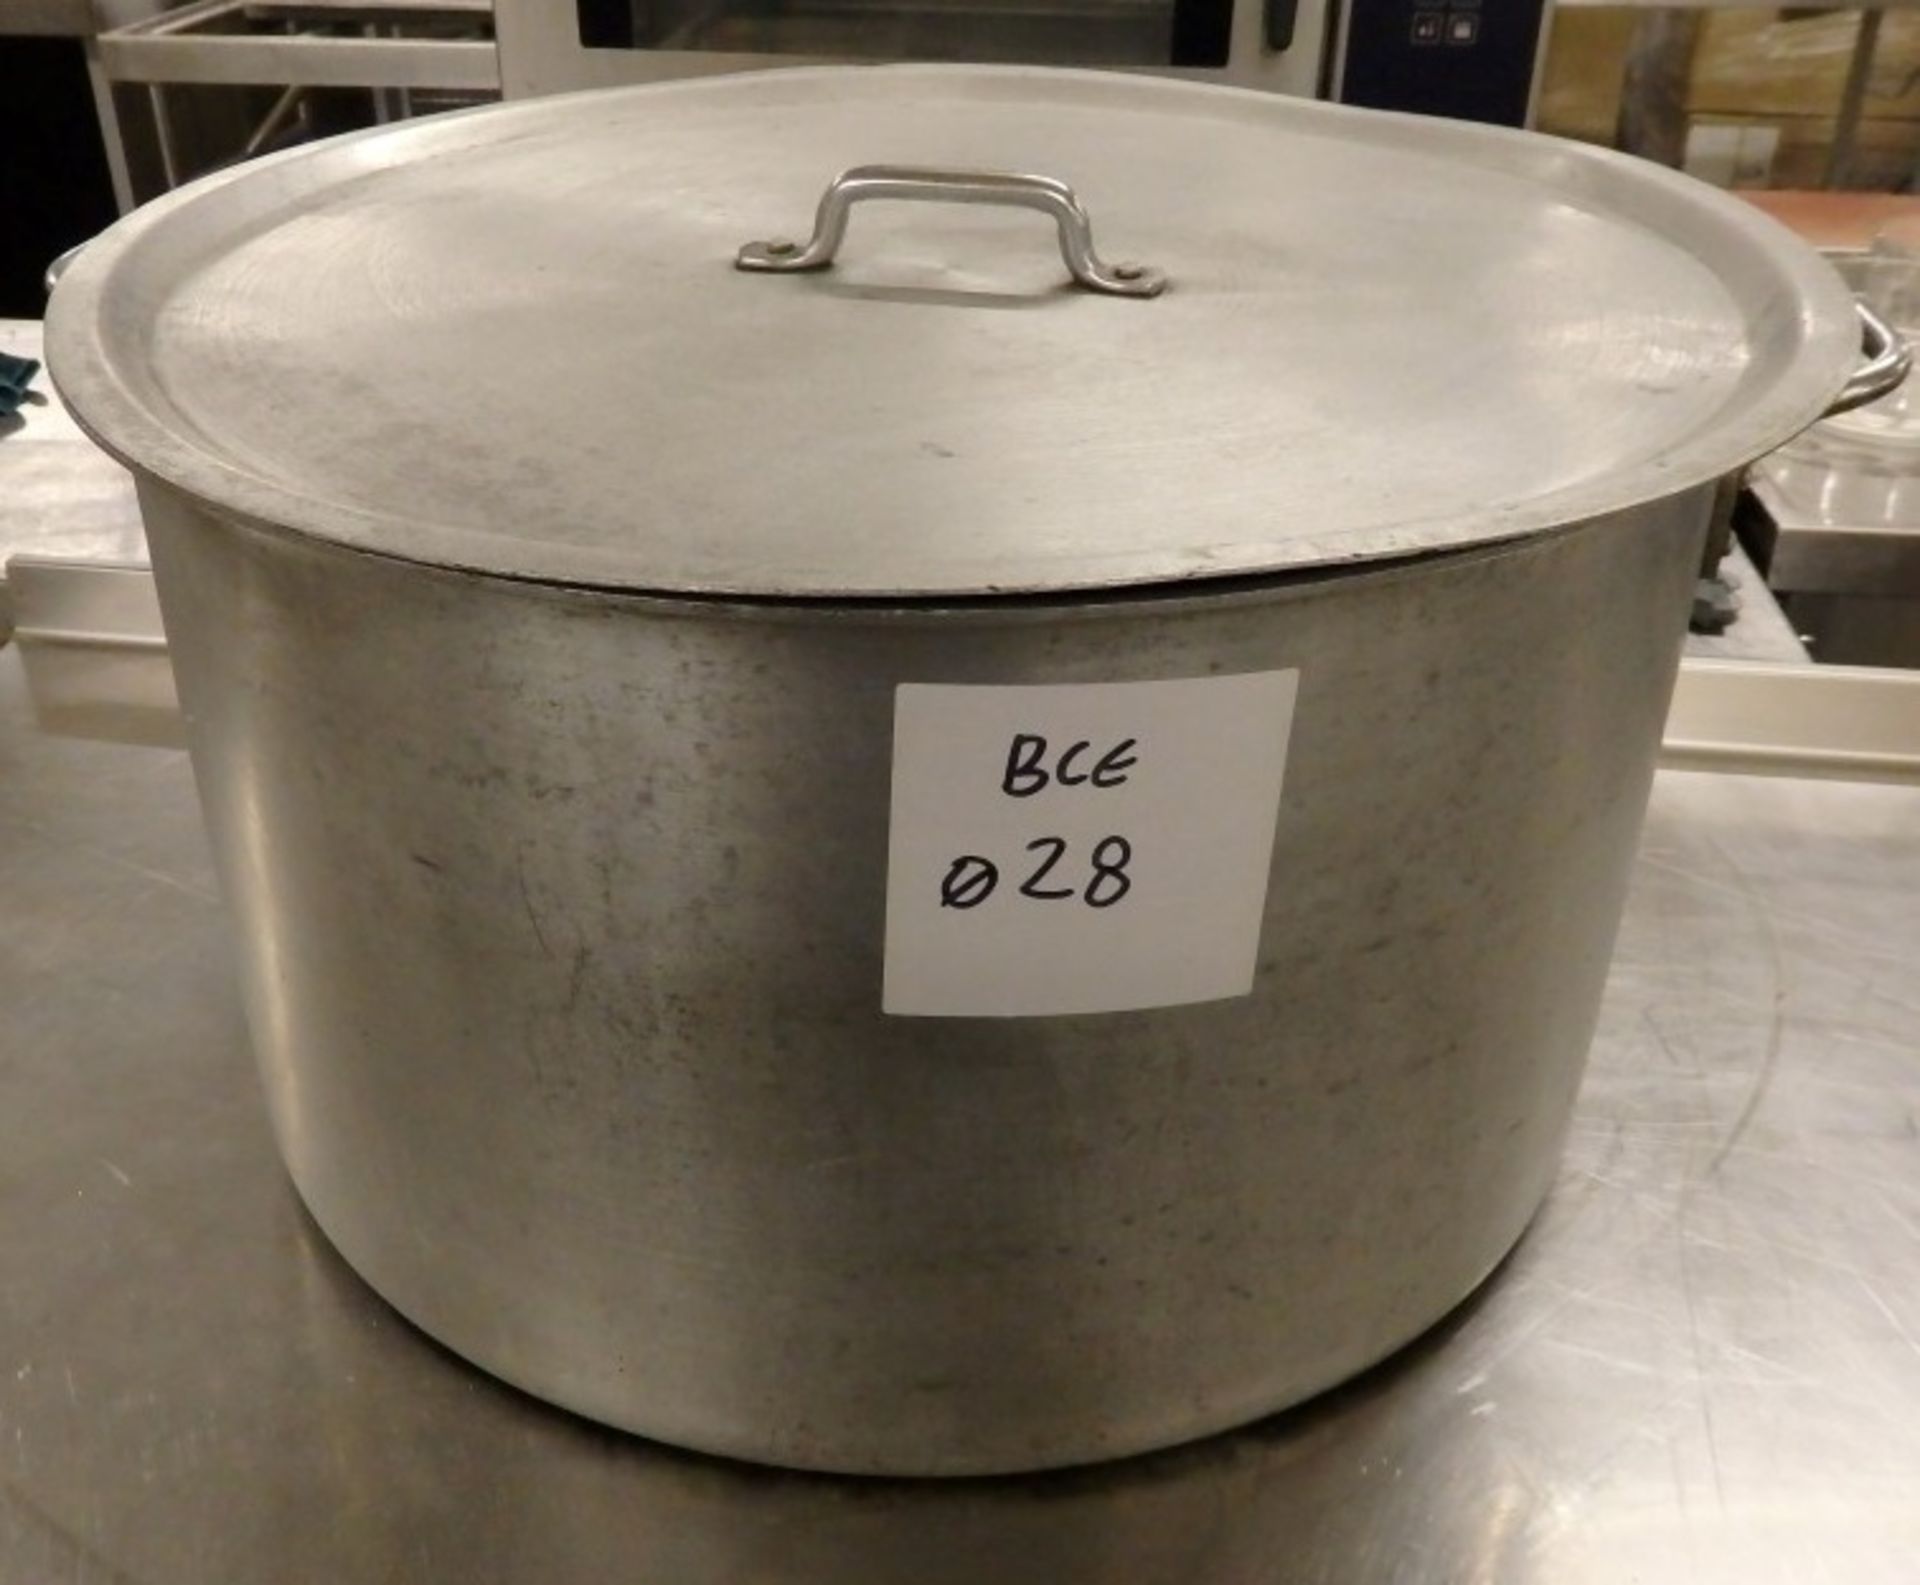 1 x Large Stainless Steel Cooking Pot With Lid - Dimensions: H34 x Diameter 57cm - Ref: BCE028 - - Image 5 of 5